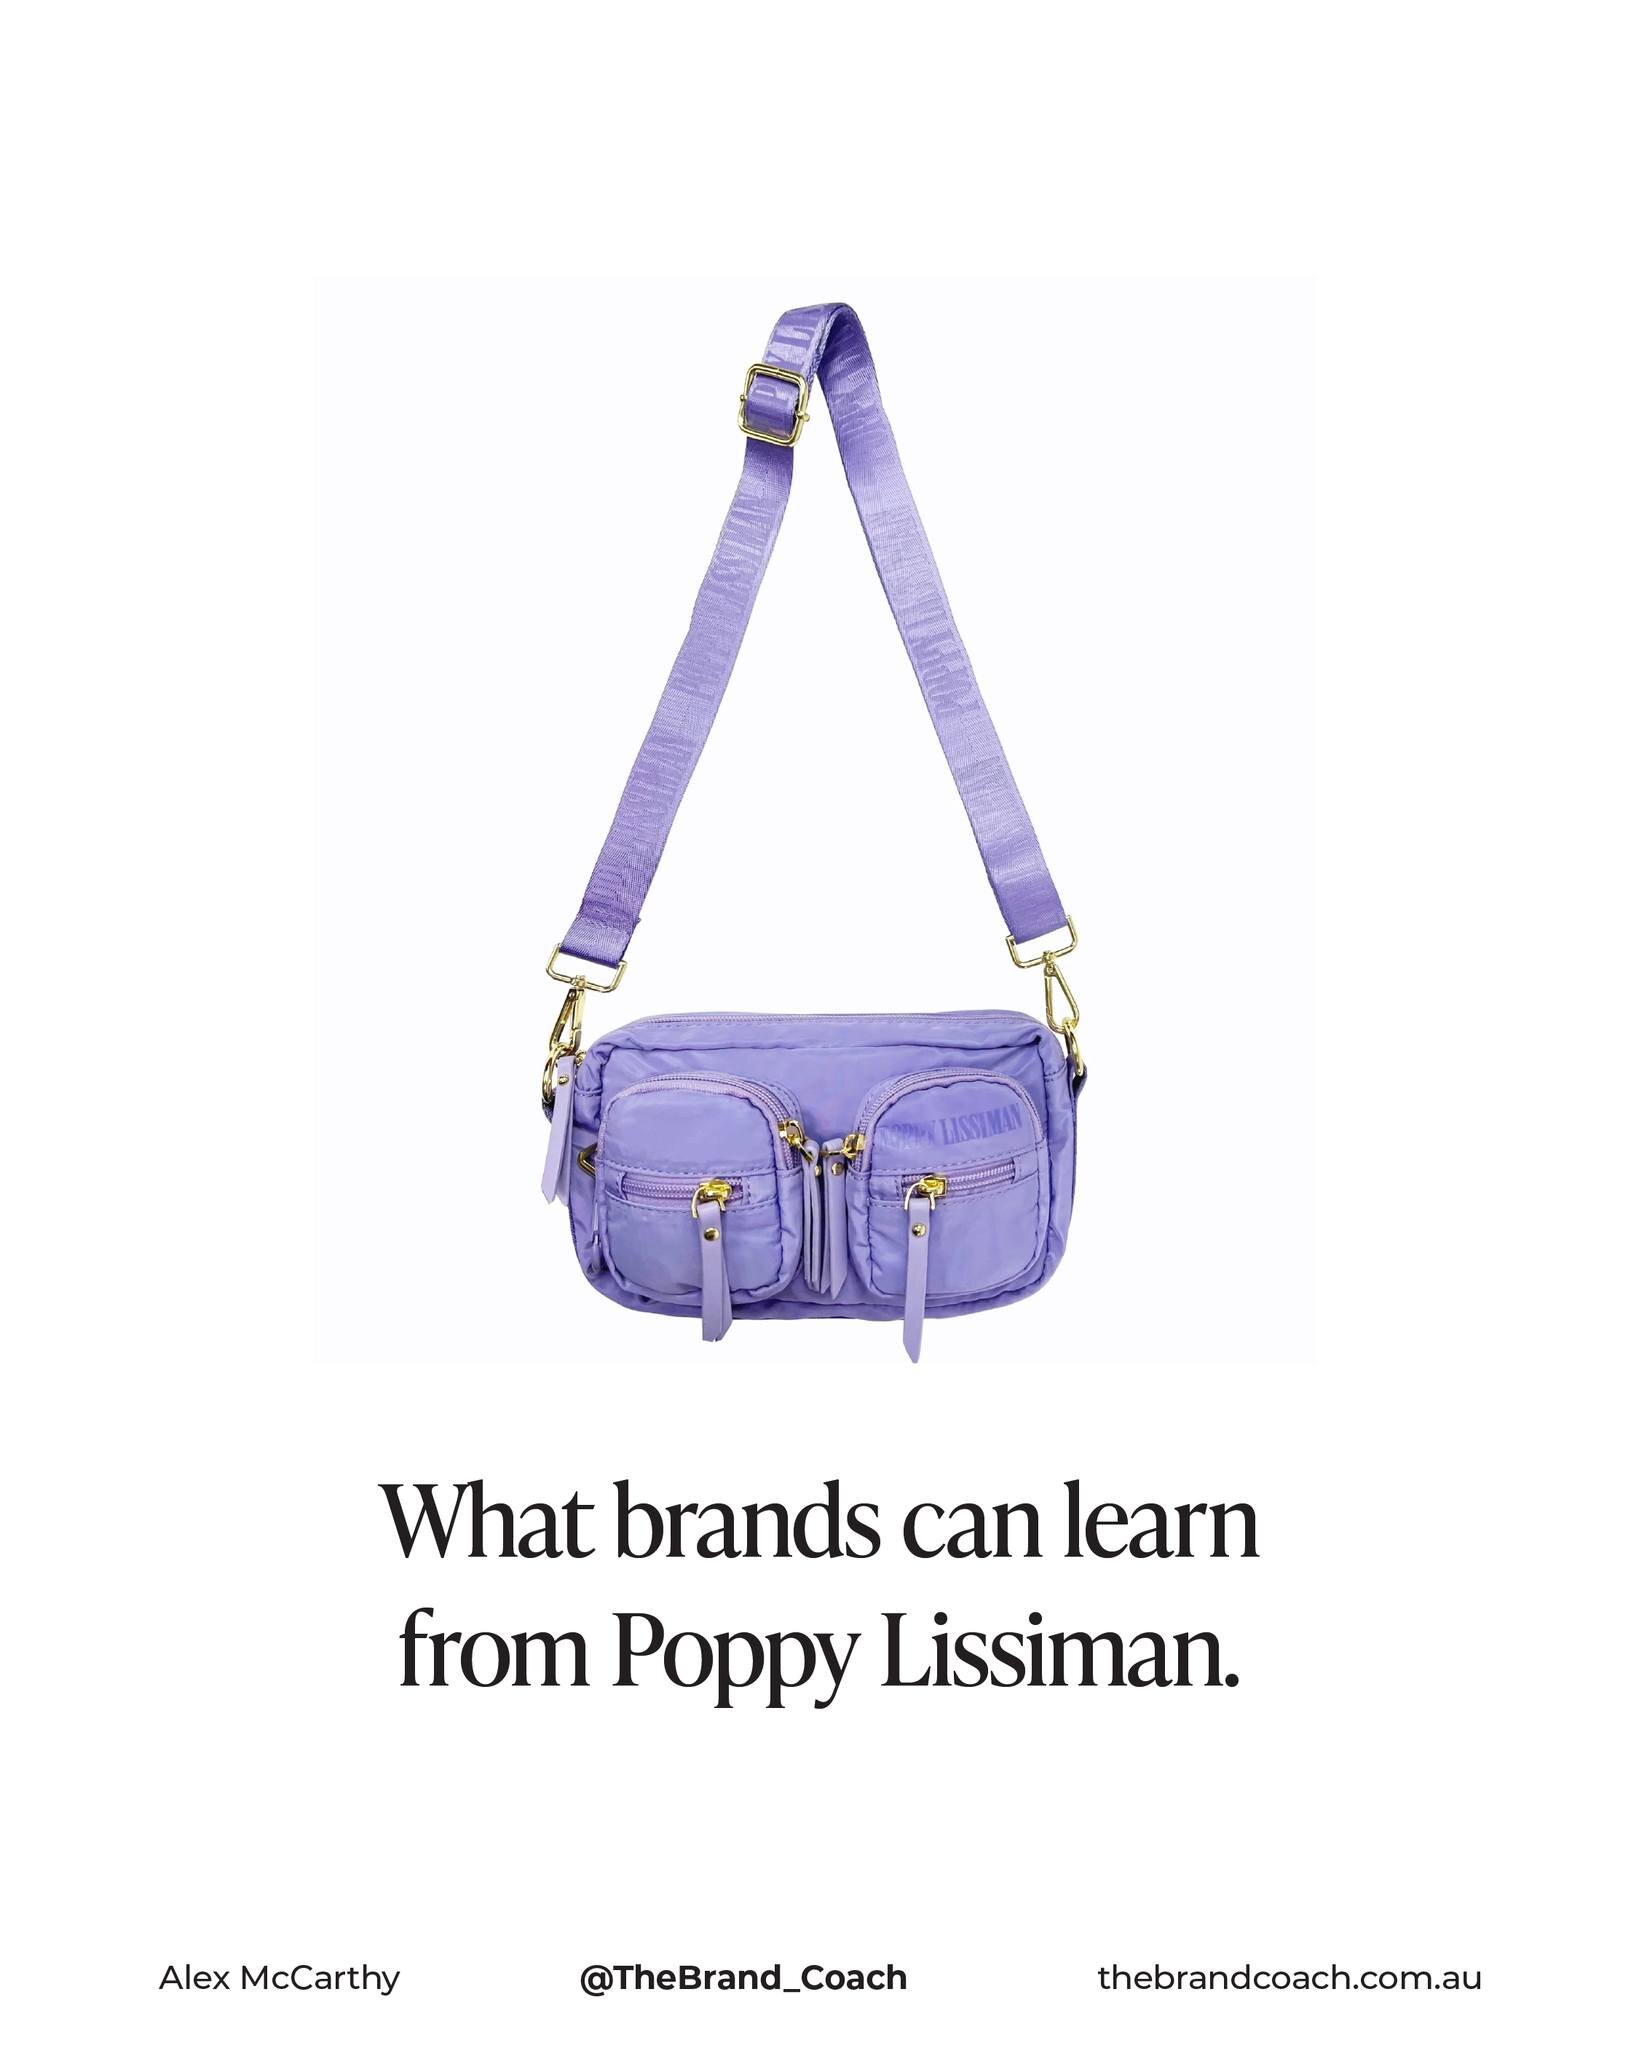 Poppy Lissiman is the cult accessories brand all over your social feed 💅 Here&rsquo;s what you can learn from her success... 💼✨

@thebrand_coach 

#thebrandcoach #brandingtips #brandingdesign #brandingstrategy #Branding101 #diybranding #branddesign